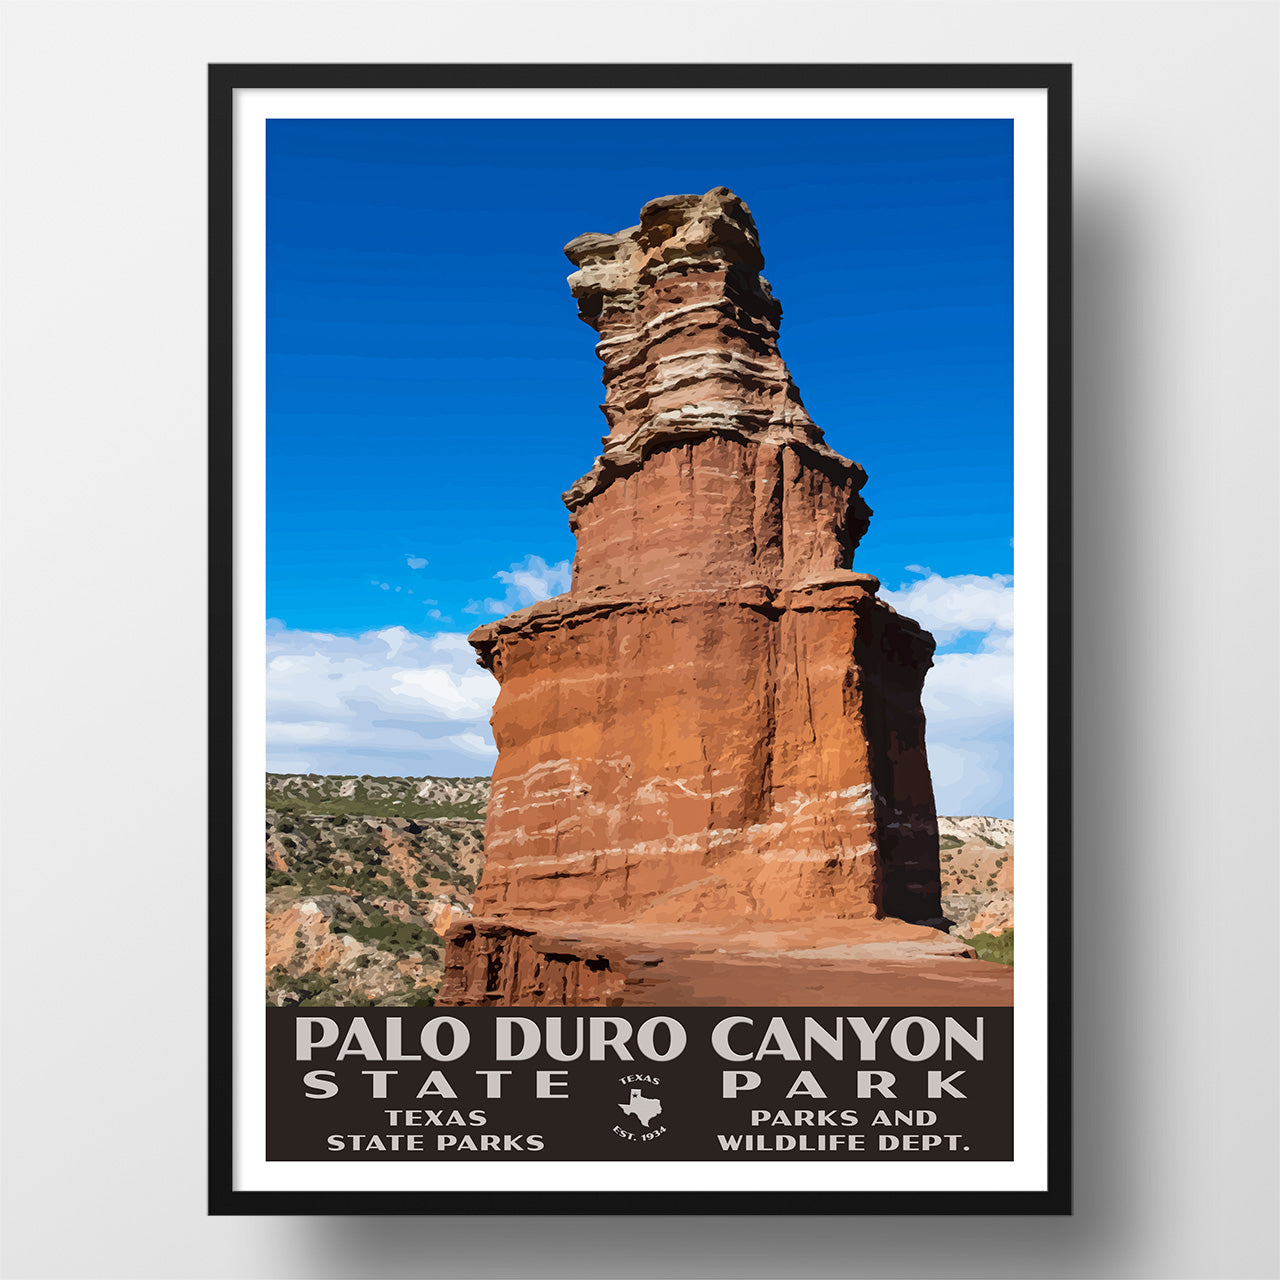 Palo Duro Canyon State Park Poster-WPA (Lighthouse Blue Sky)